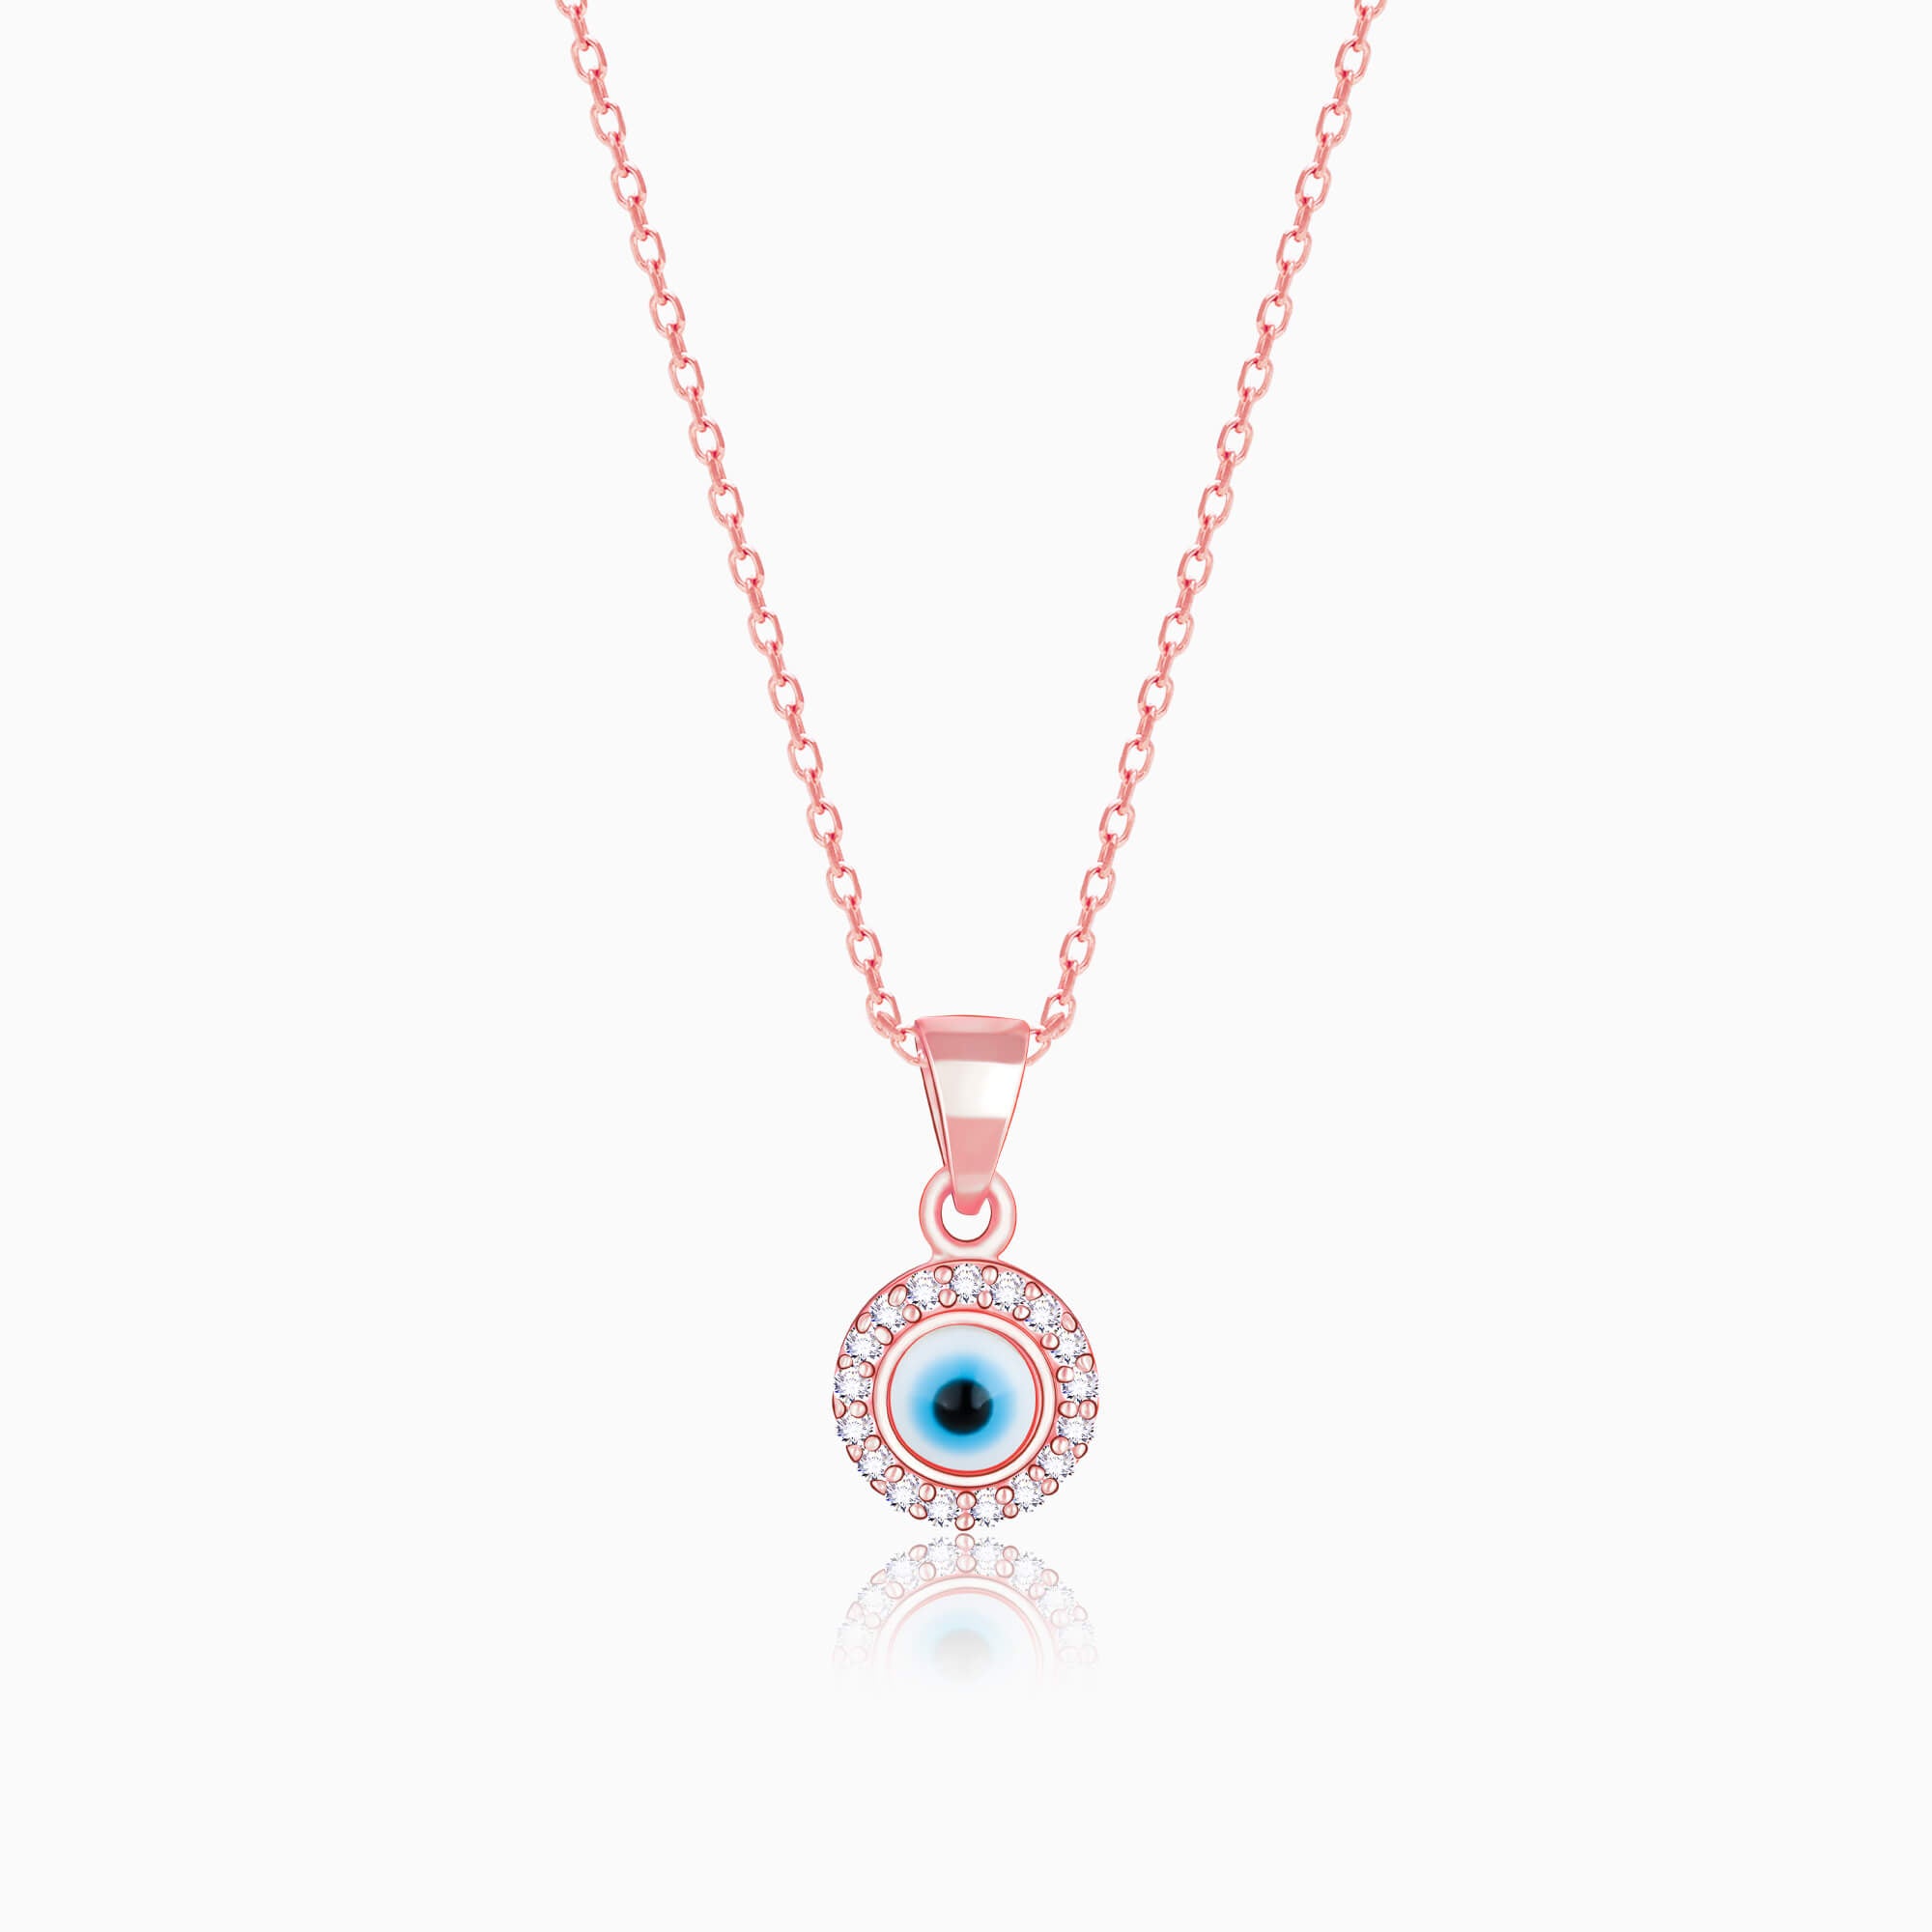 Buy Evil Eye Necklace, 14K Yellow Gold Round Evil Eye Necklace, Minimalist Evil  Eye Necklace, Dainty Evil Eye Necklace, Nazar Necklace, Kabbalah Online in  India - Etsy